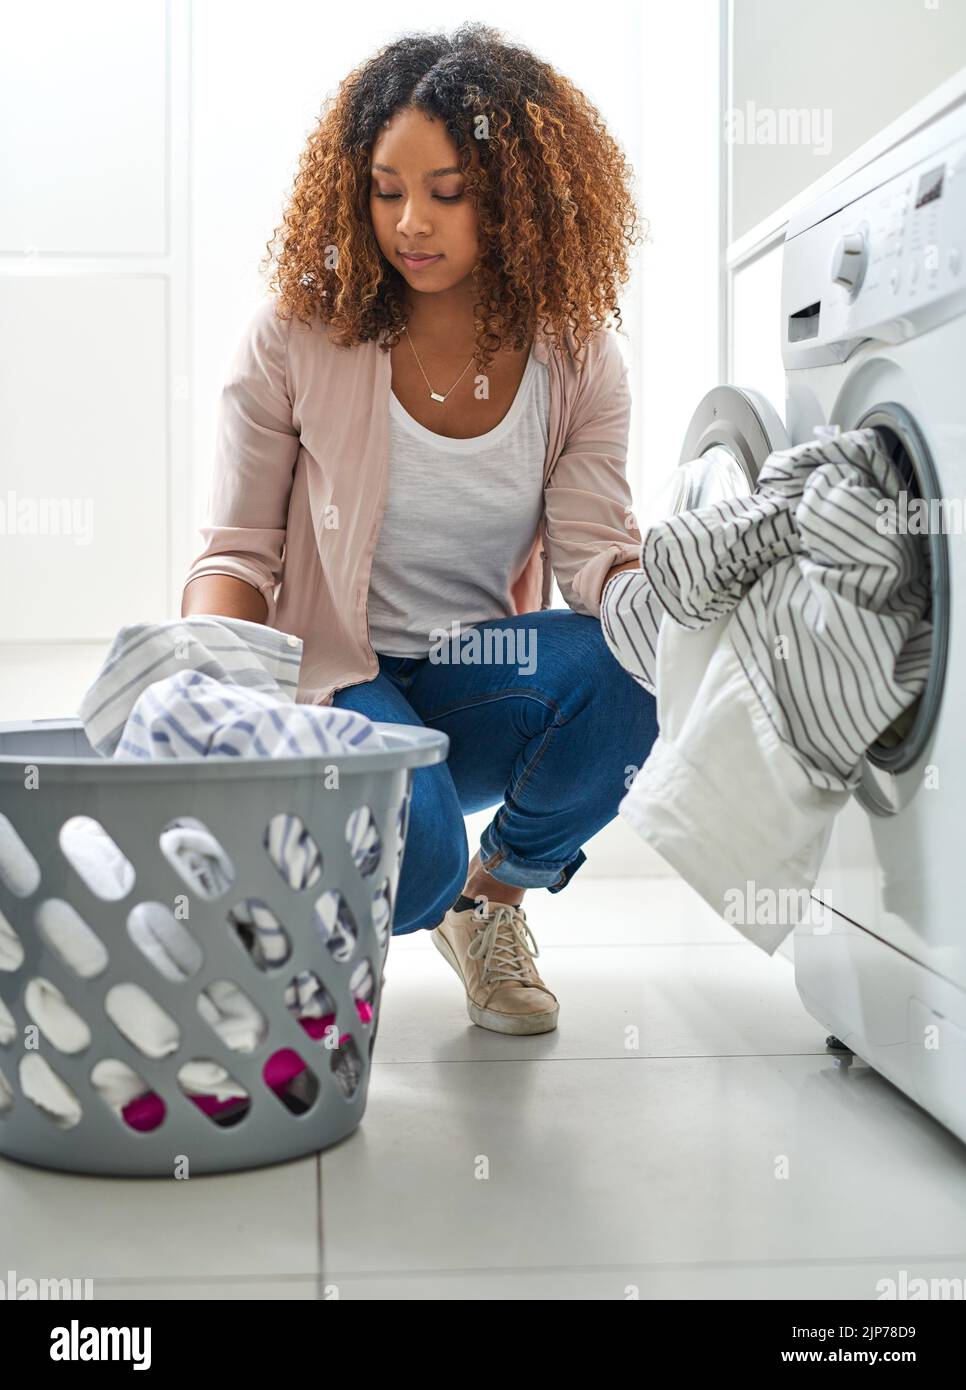 Its a chores type of day. a young attractive woman doing laundry at ...